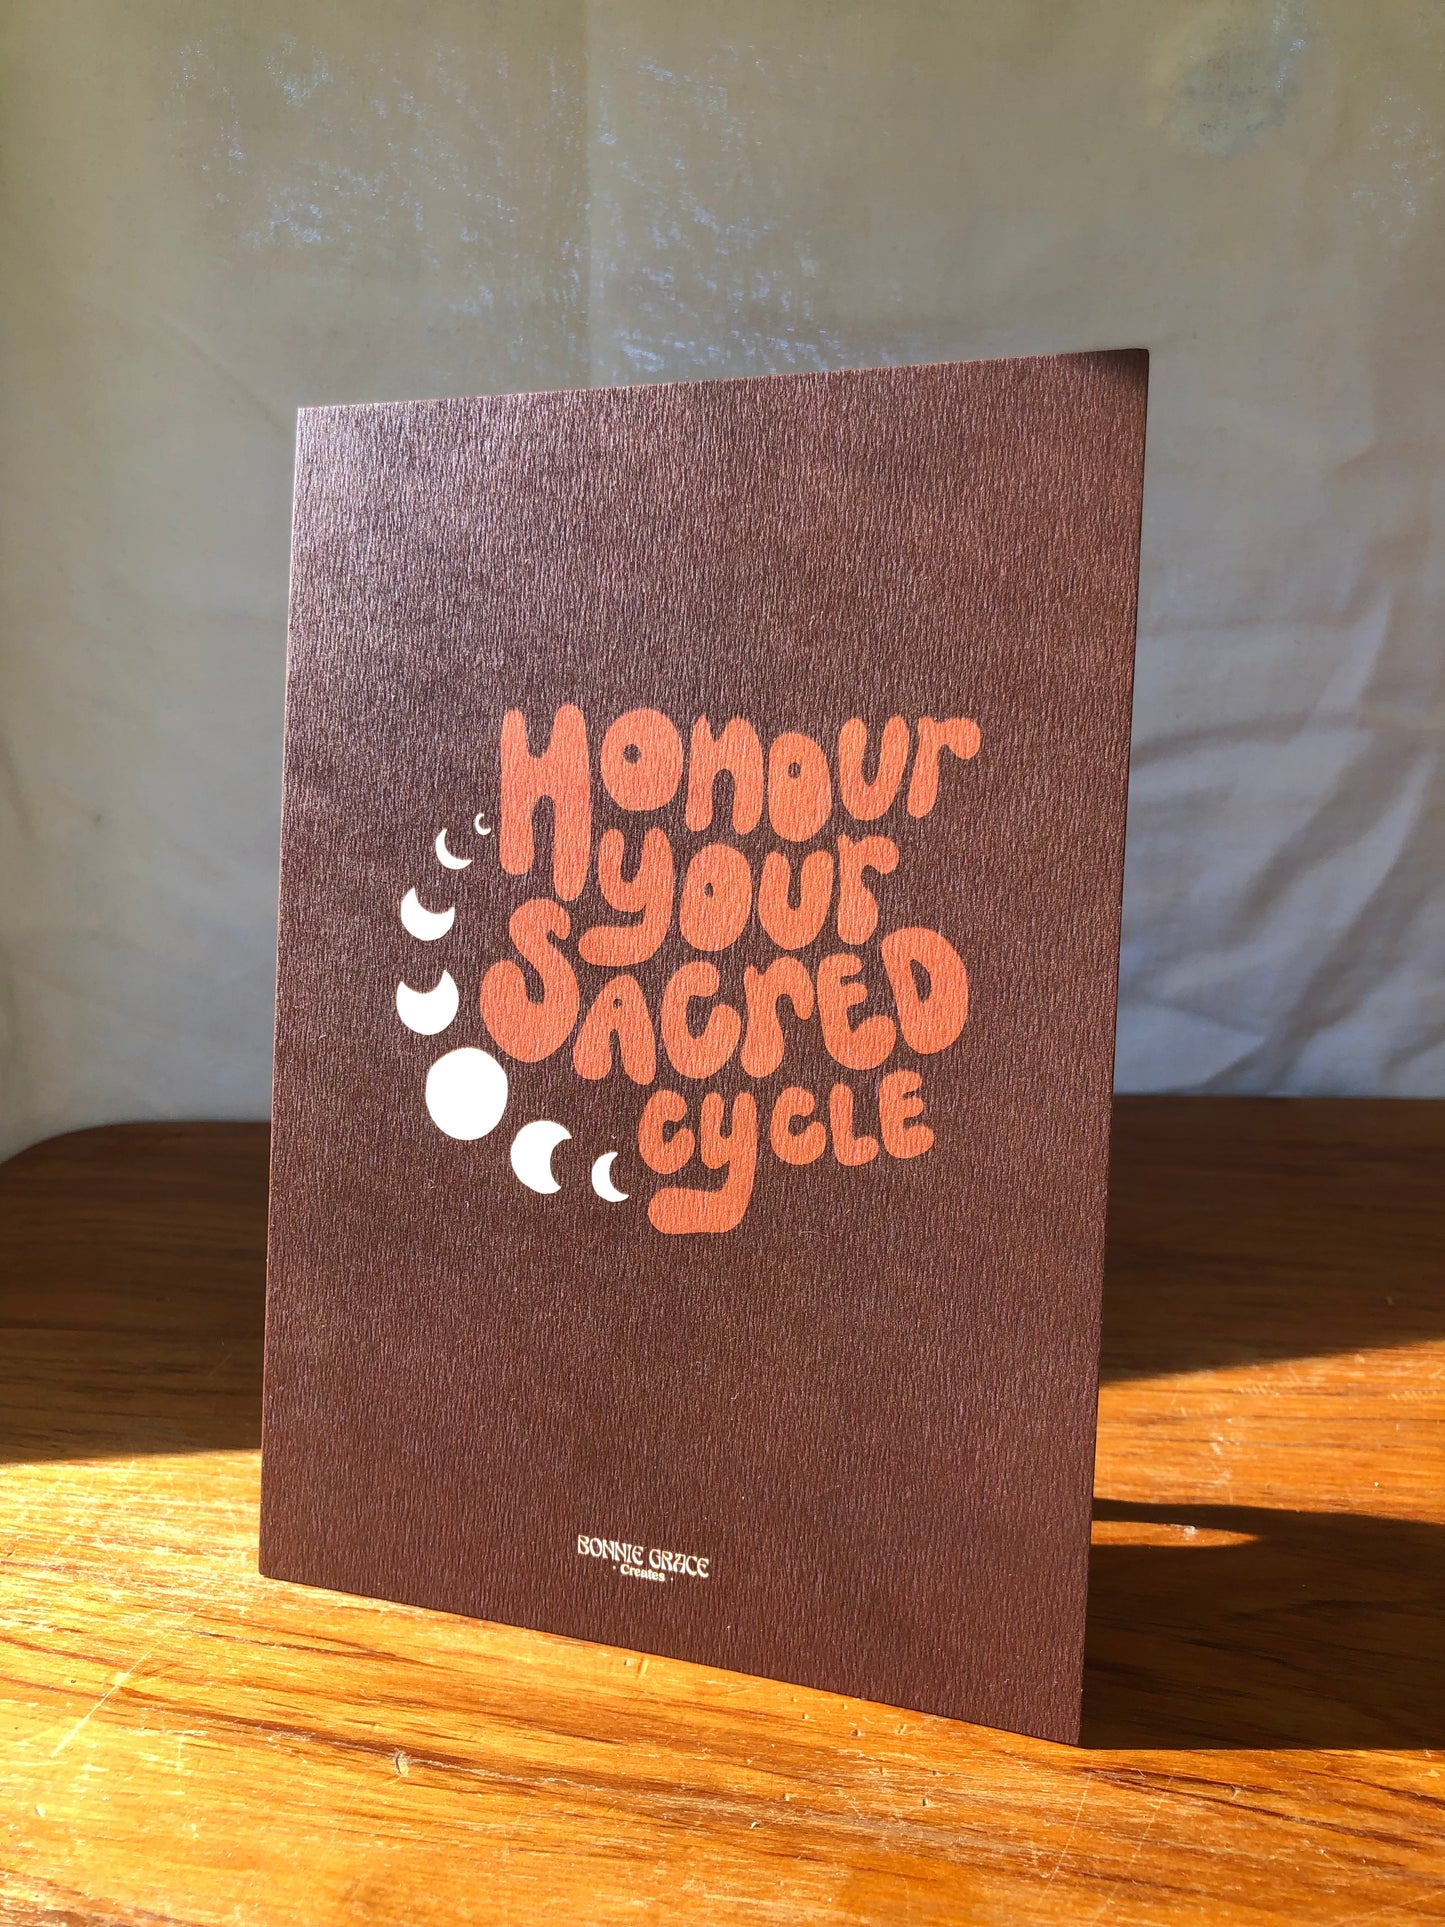 HONOUR YOUR SACRED CYCLE A5 Print